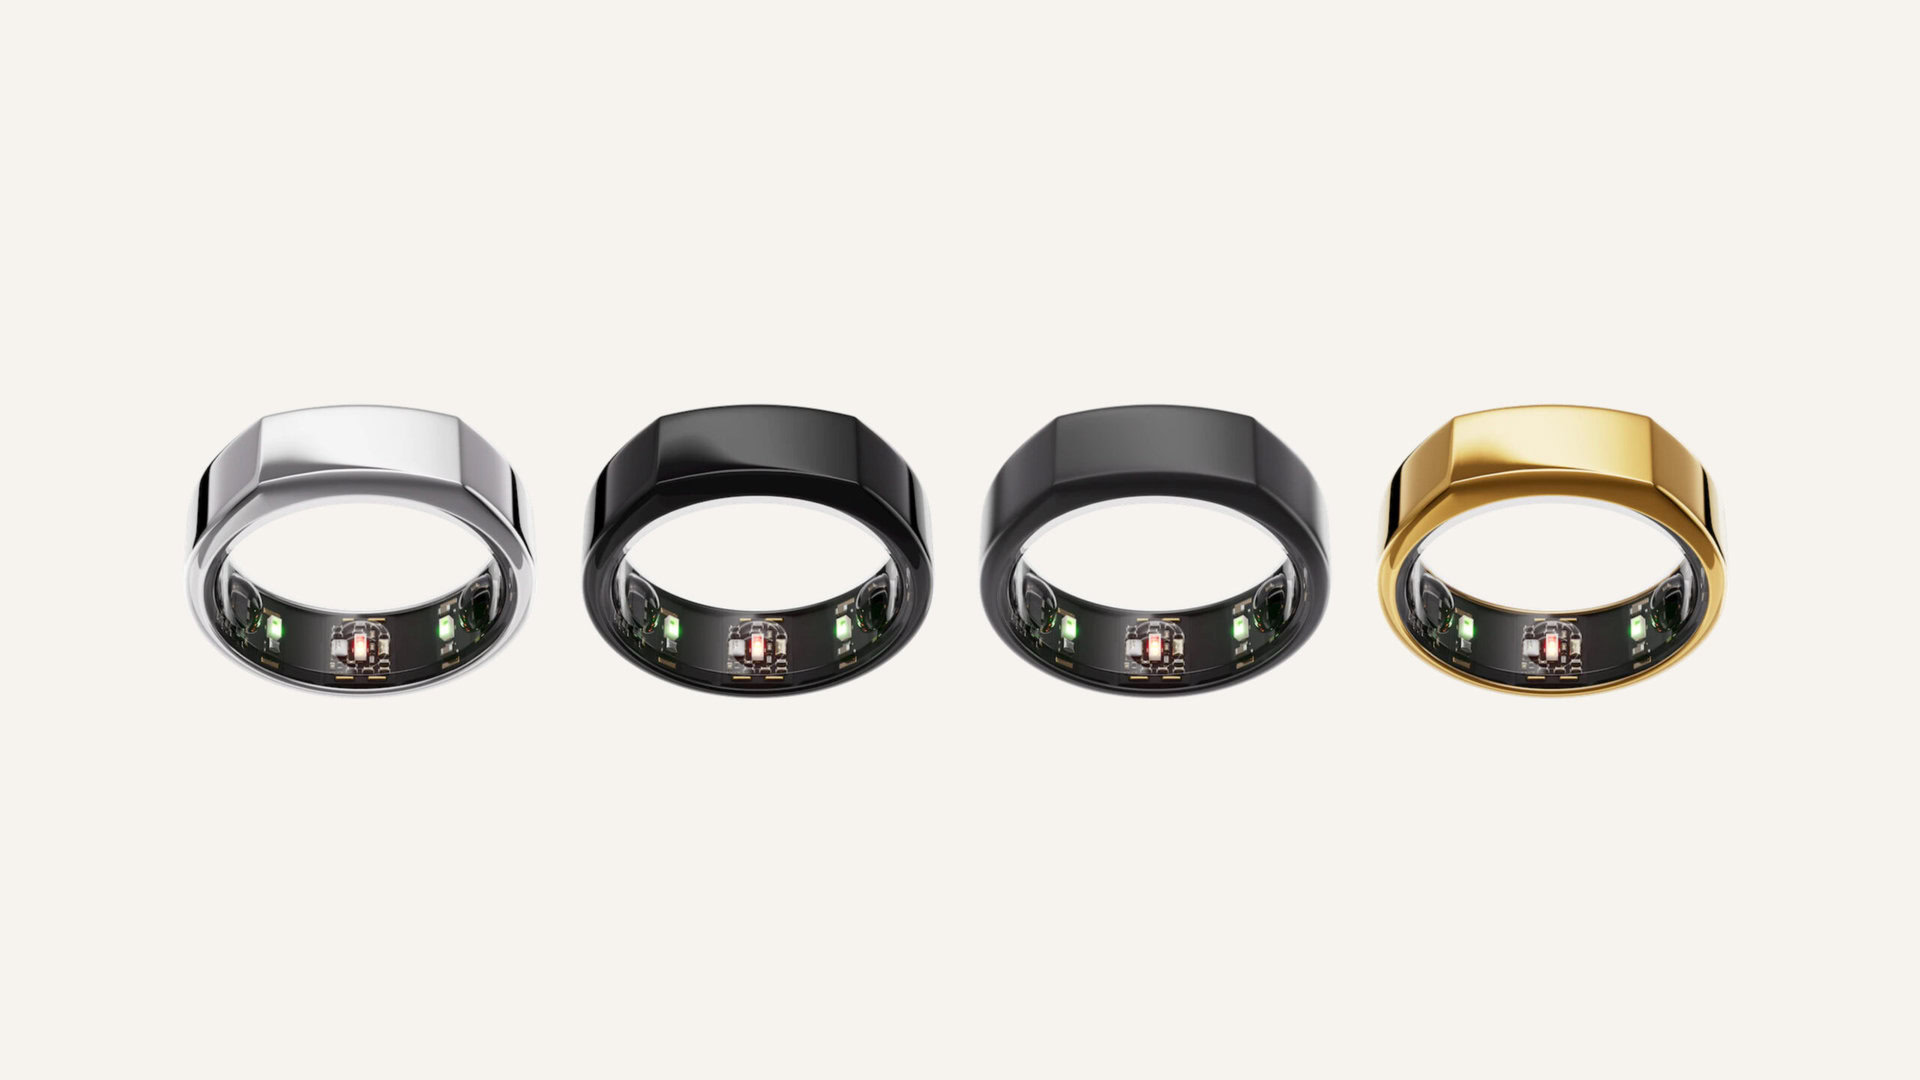 Oura partners with UCSF to determine if its smart ring can help detect  COVID-19 early | TechCrunch